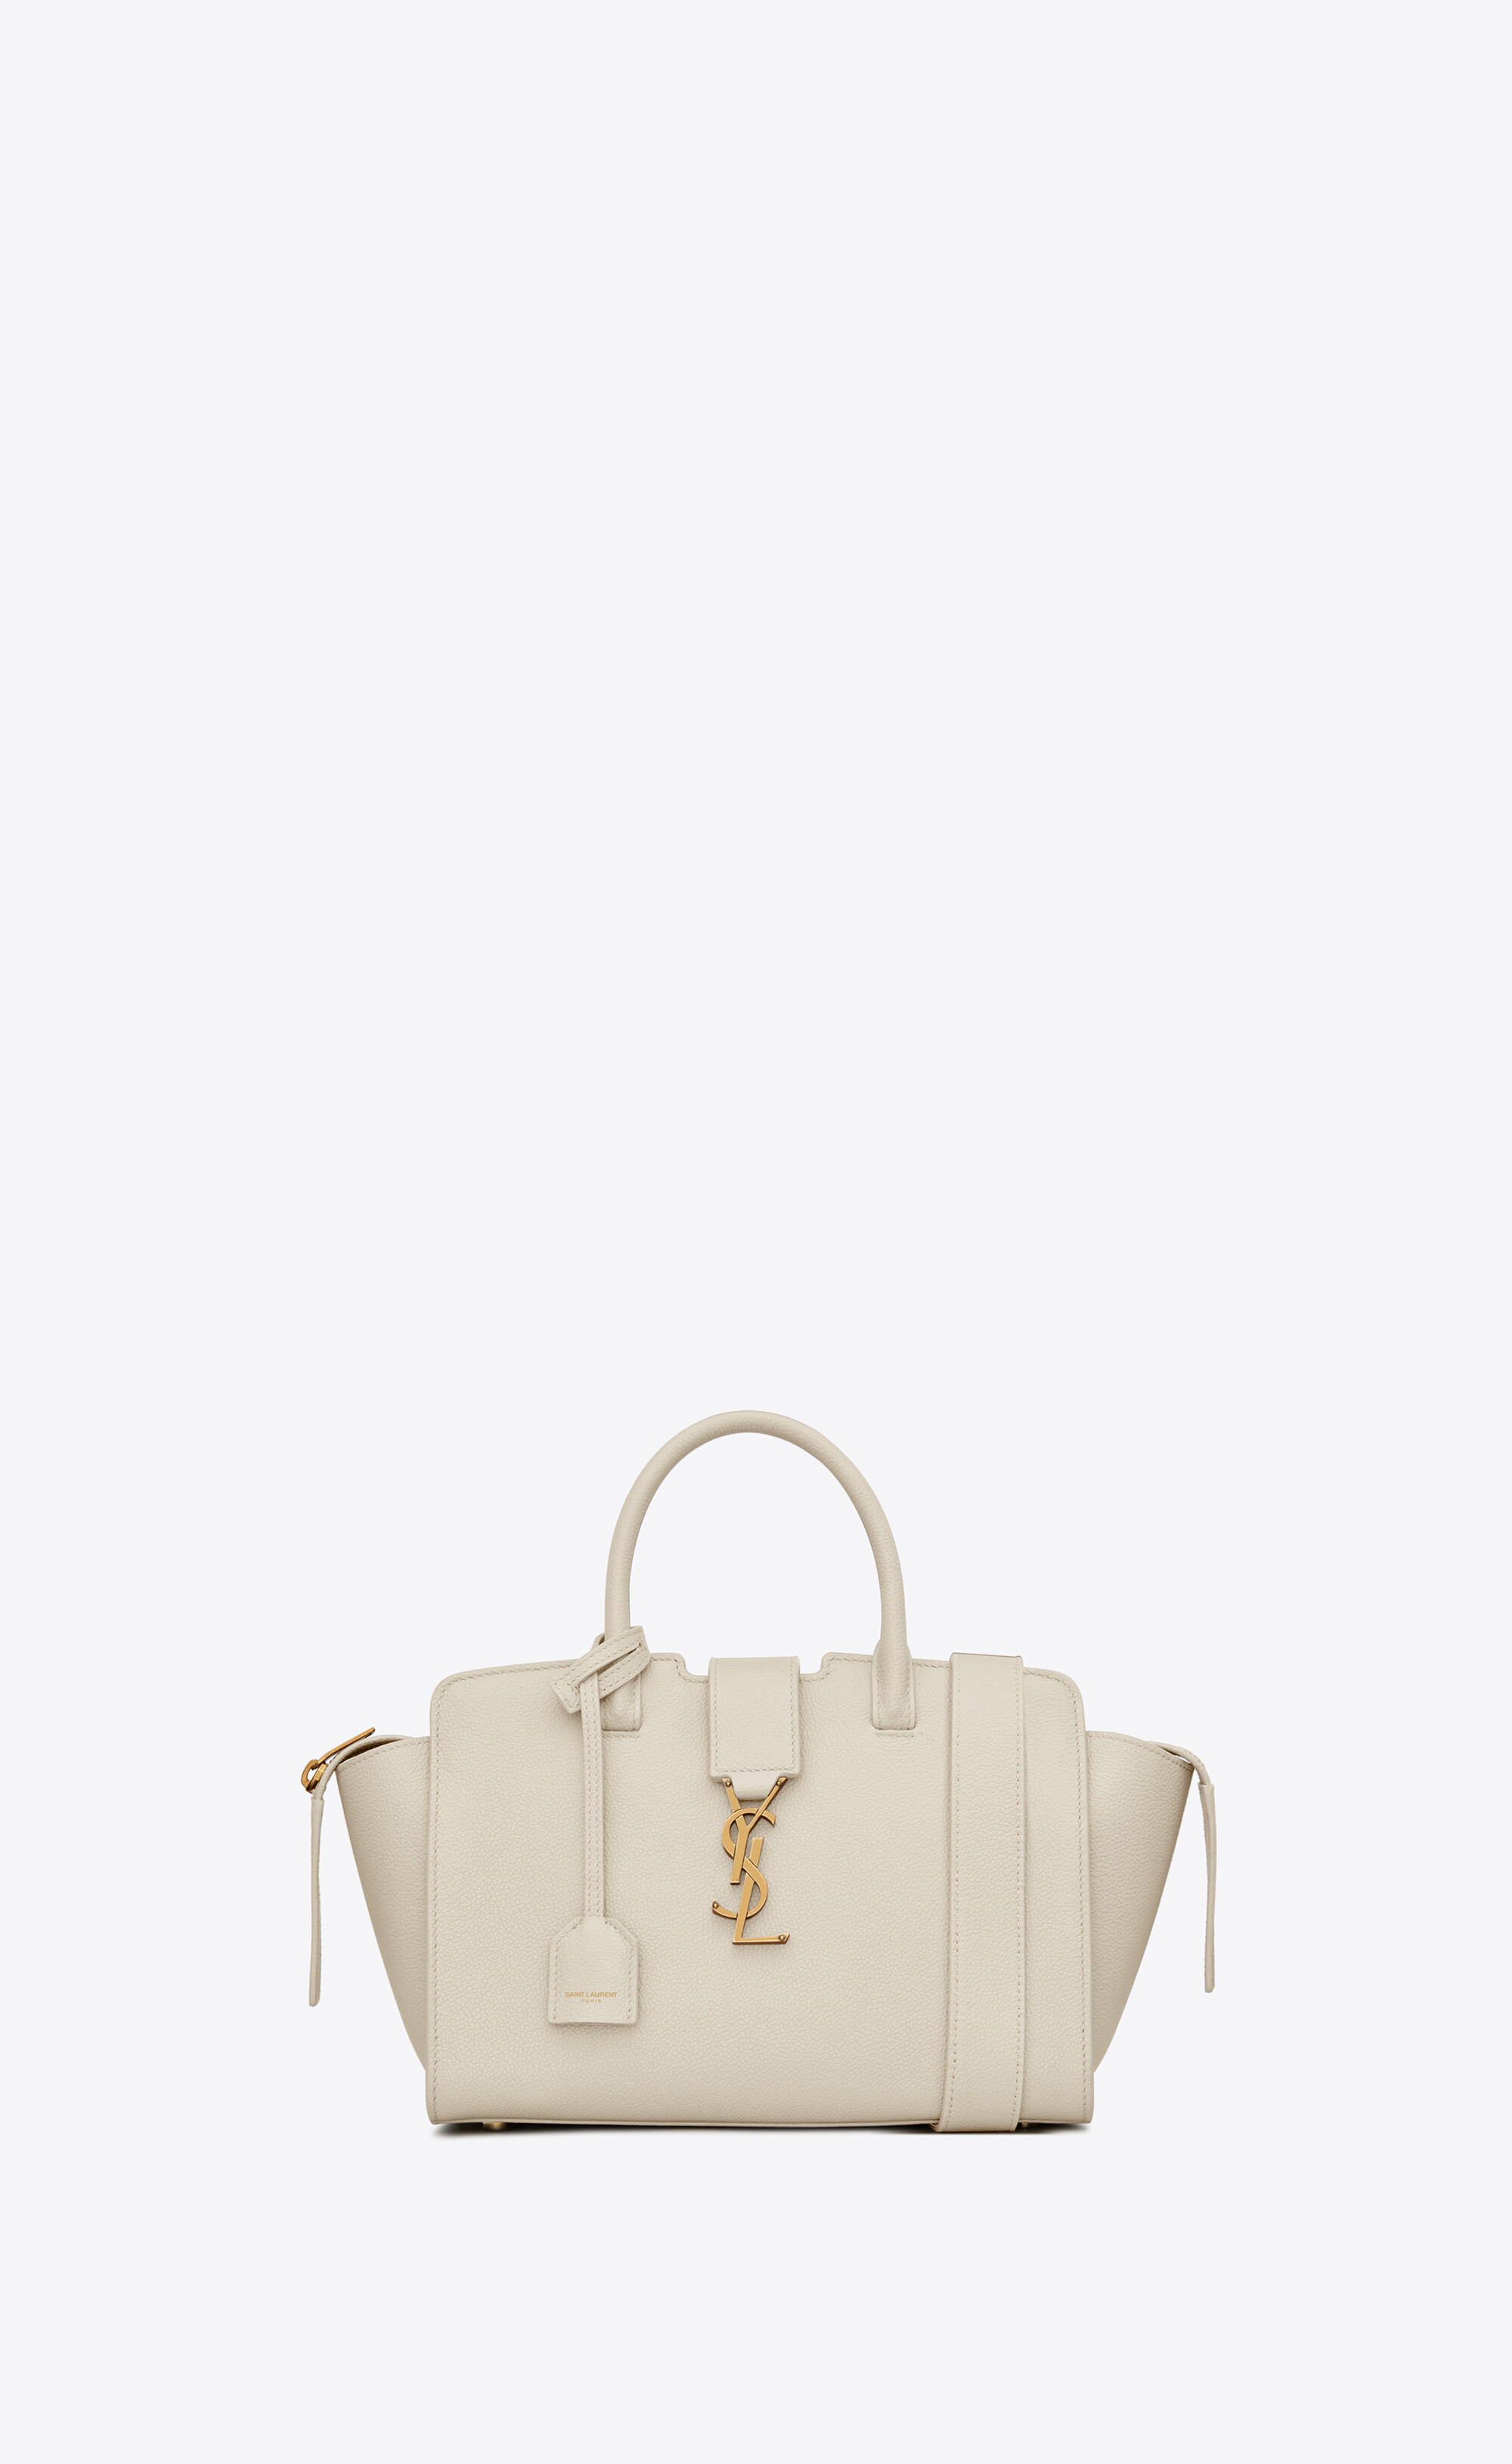 Shop Saint Laurent DOWNTOWN 2020-21FW DOWNTOWN BABY TOTE IN GRAINED LEATHER  (635346B680W1011) by lalaruru